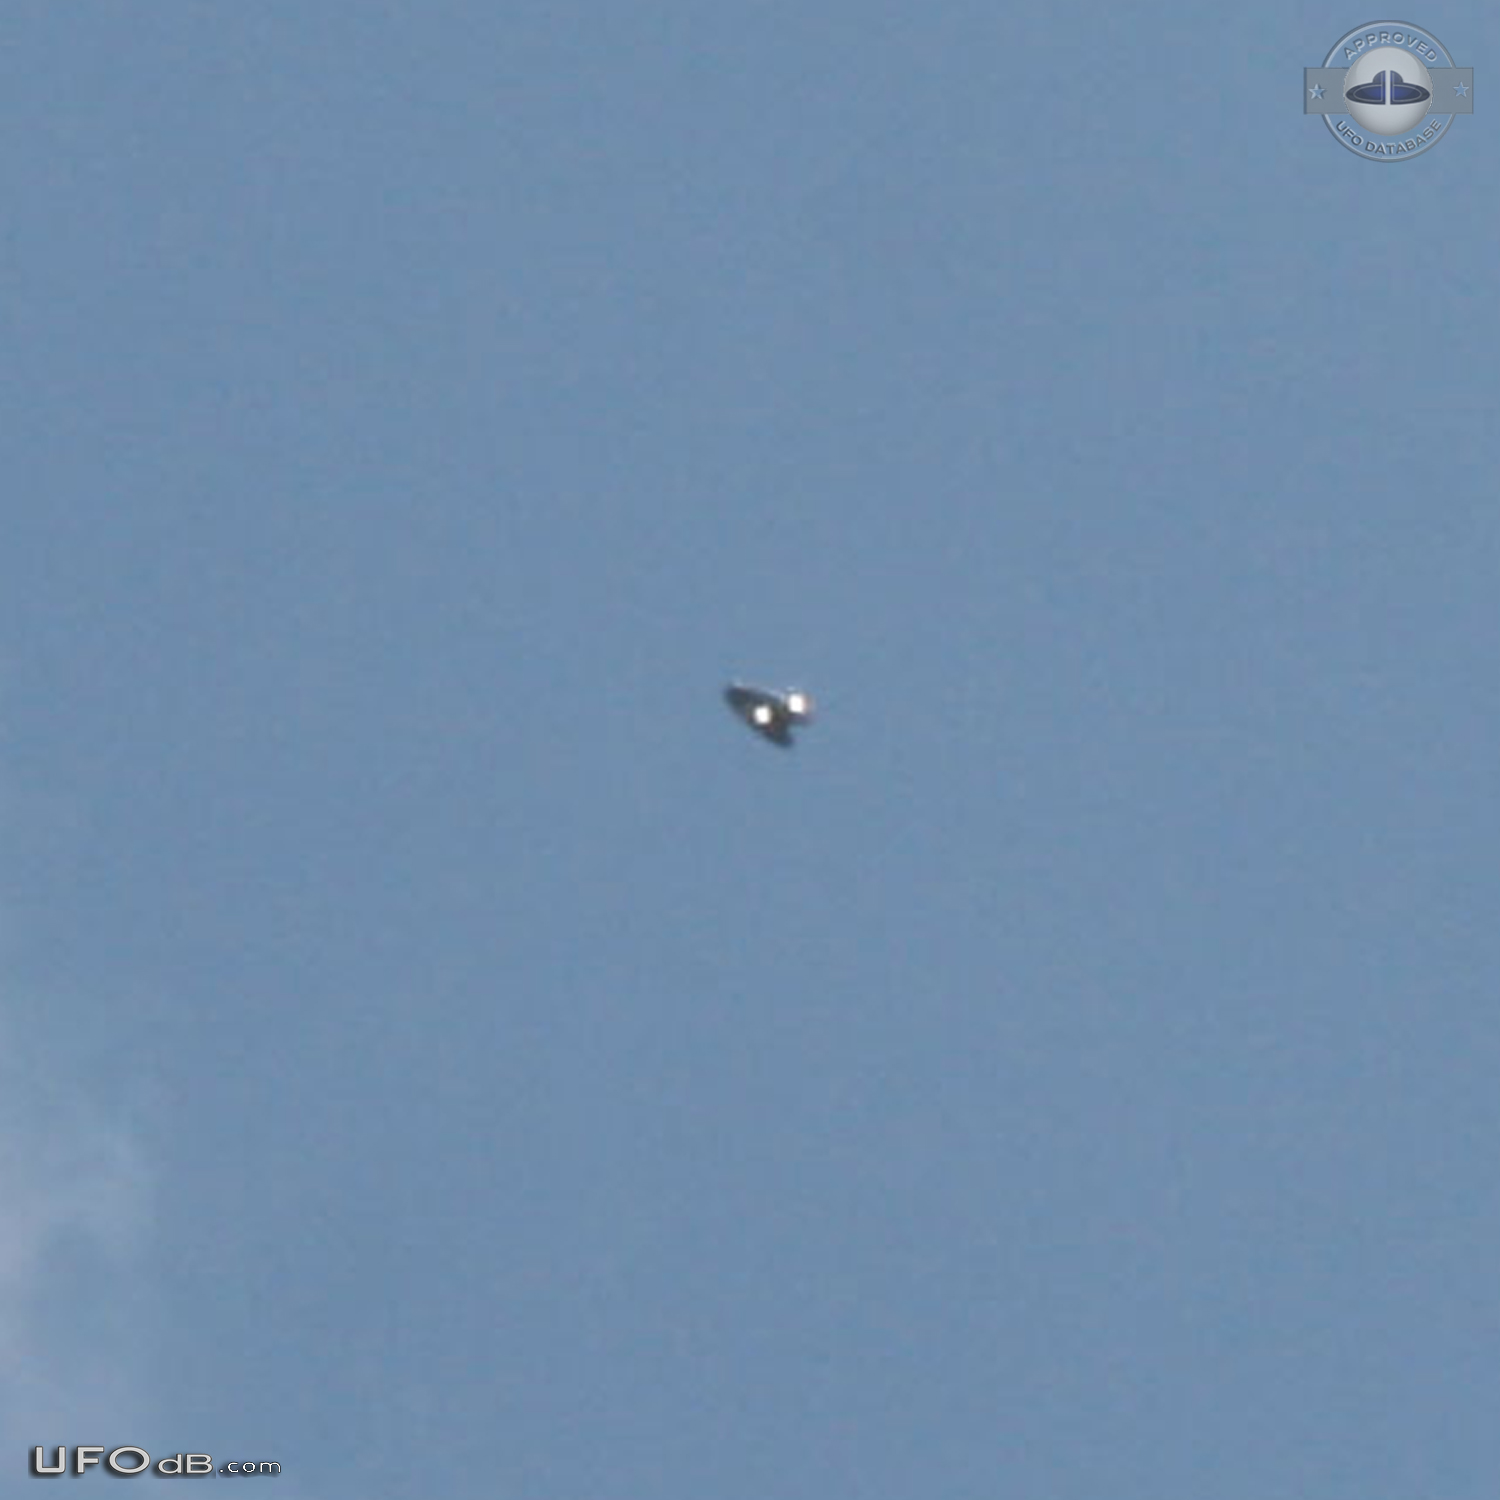 Watched UFO first in the west move quickly through to north east - Gle UFO Picture #740-2